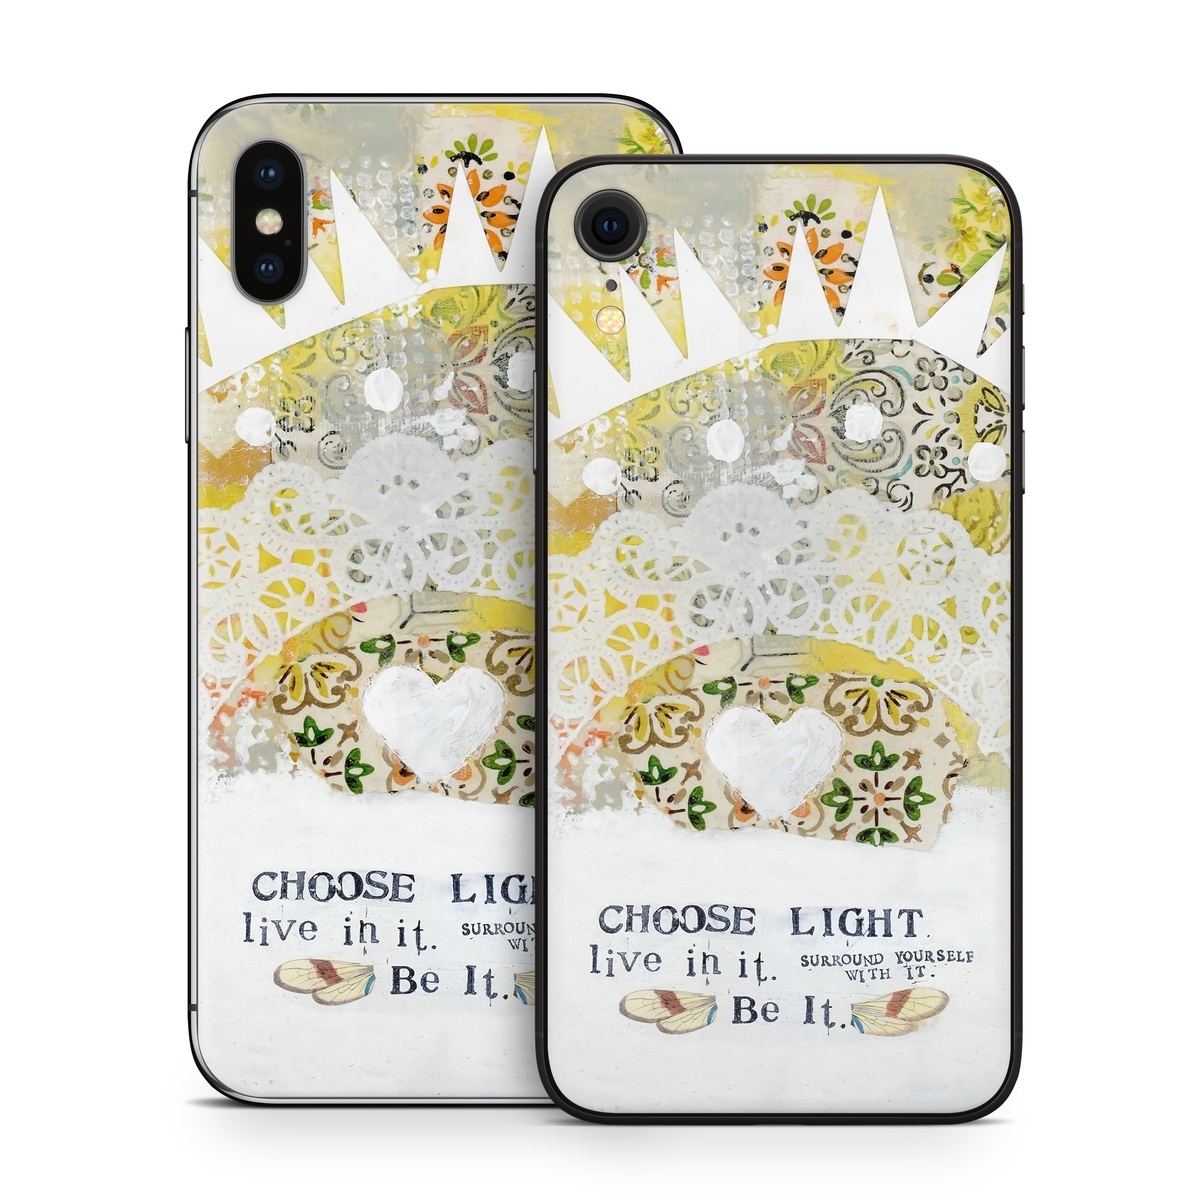 iPhone XS Skin design of Font, Greeting card, with yellow, white, green, orange, red, black colors